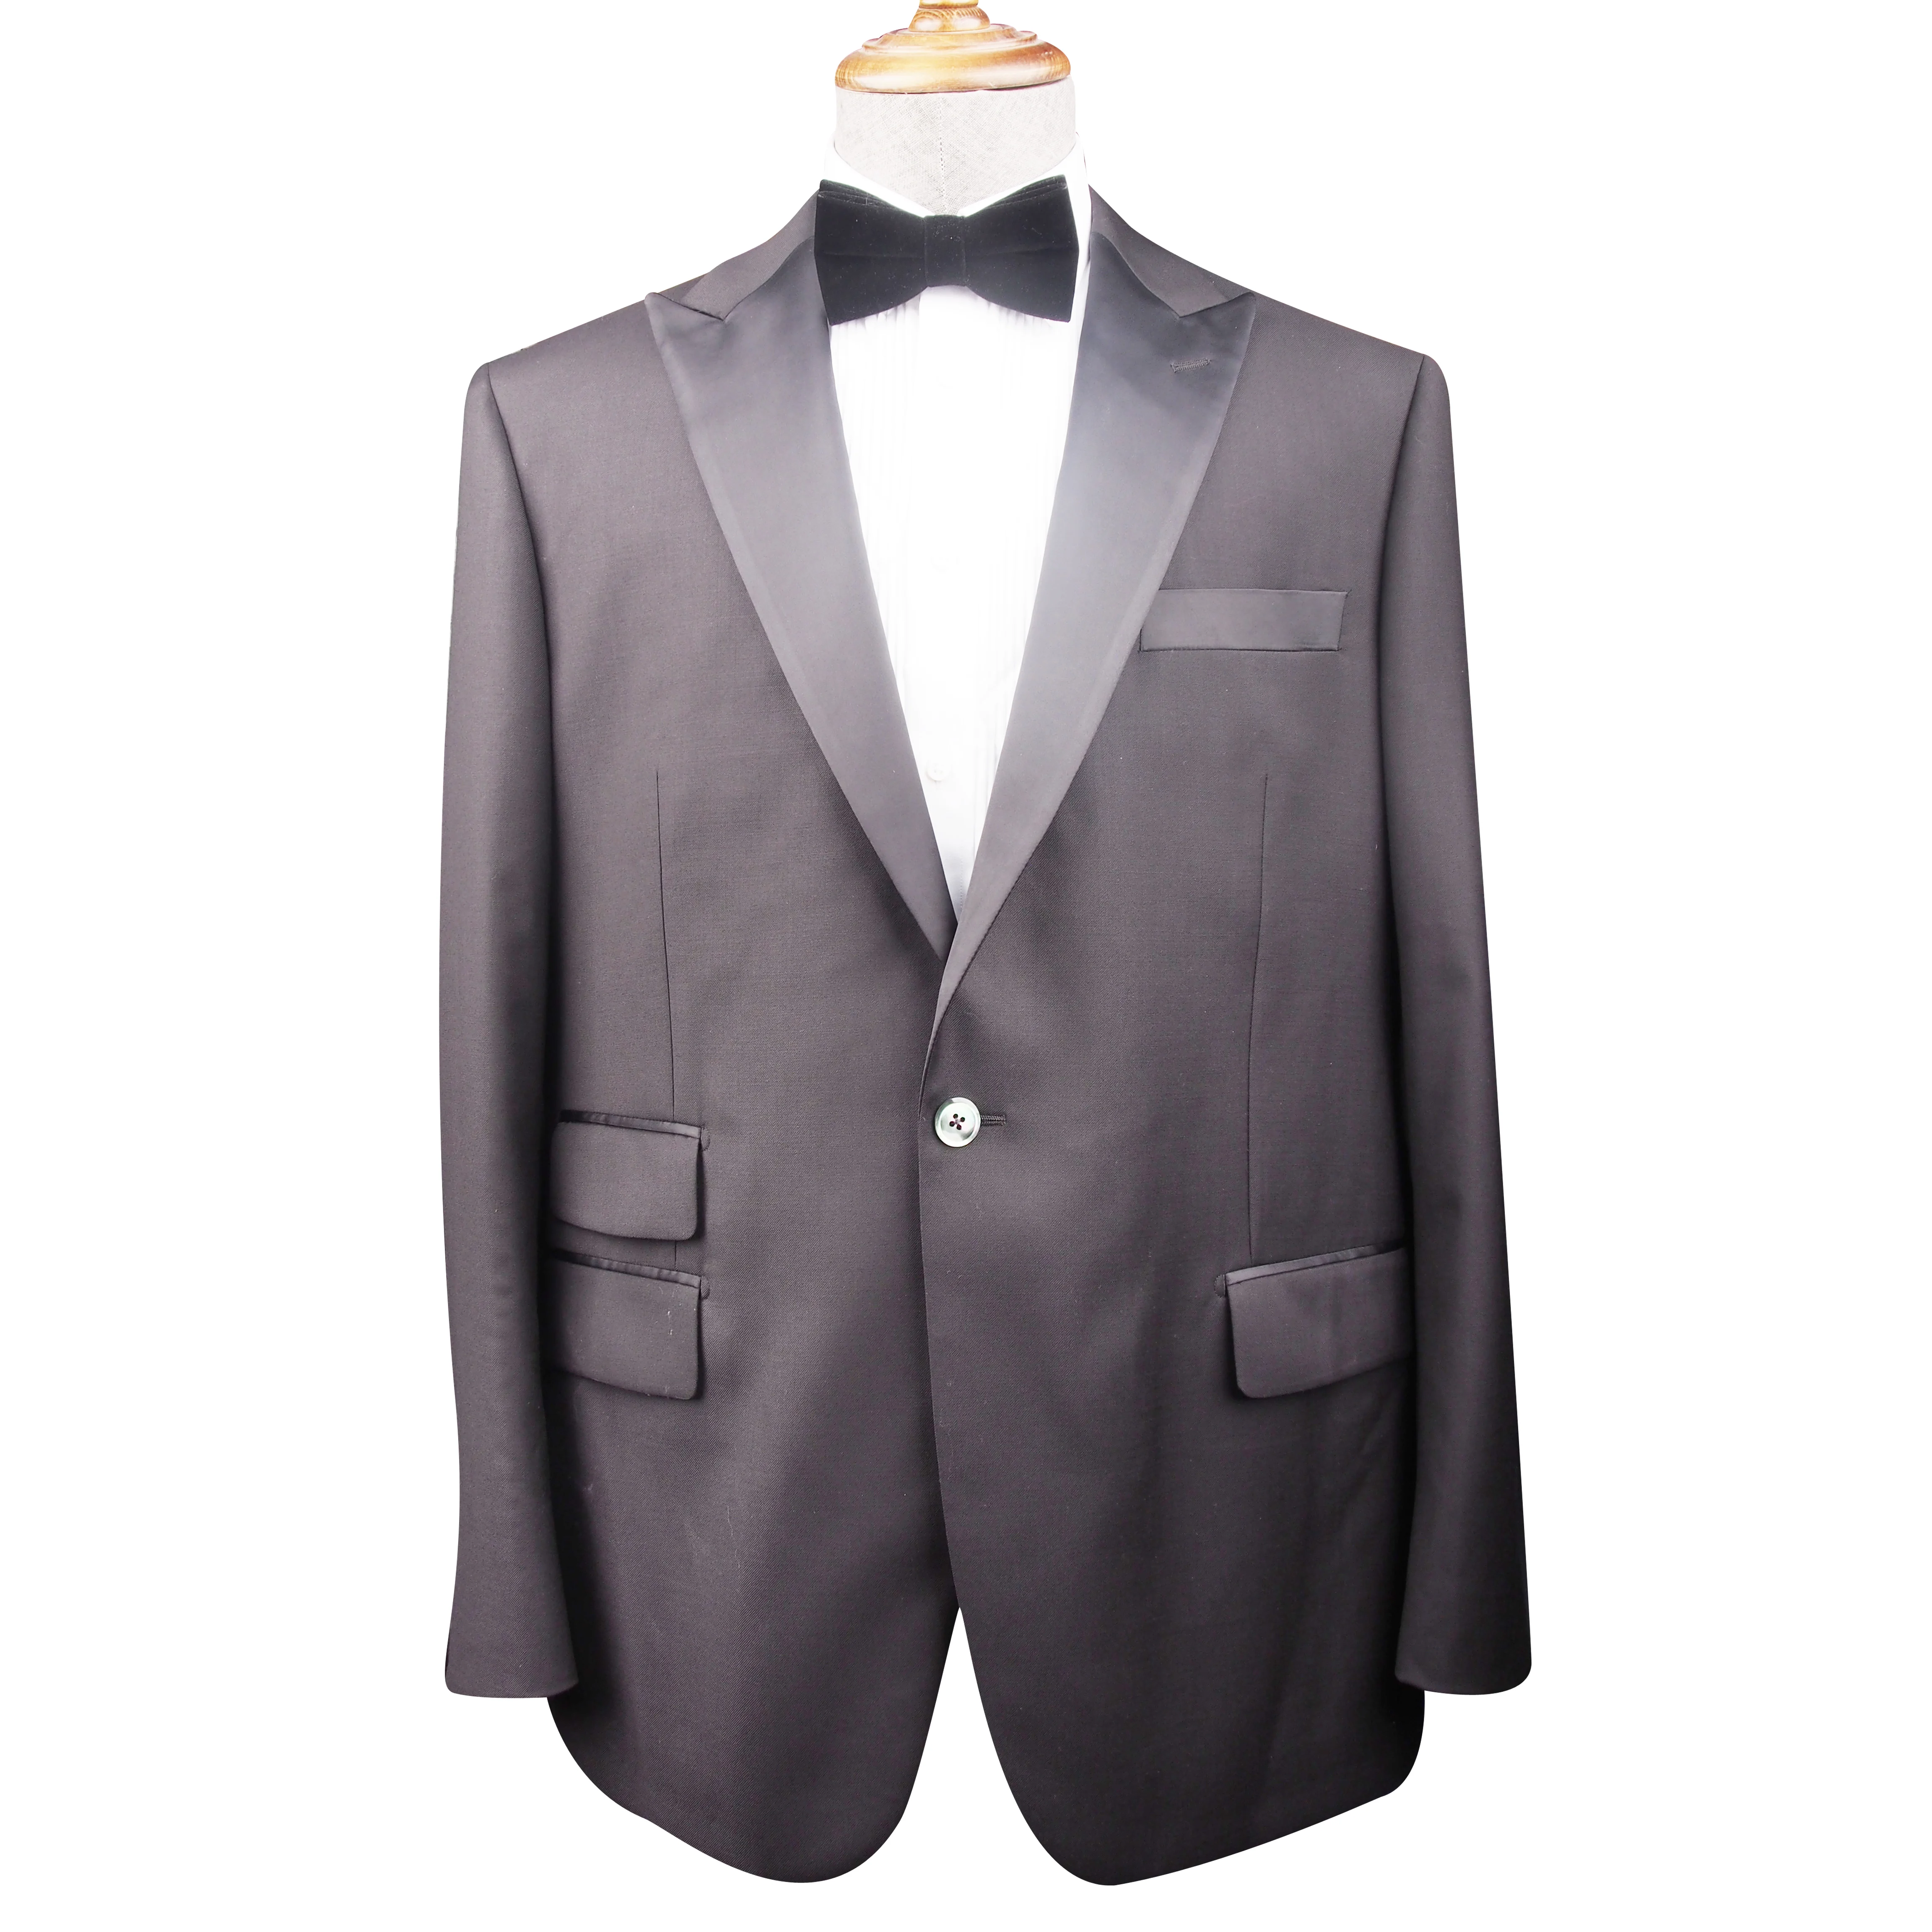 made in China wholesale 2 pieces 100% Wool  Tuxedo Suit modern men's suit